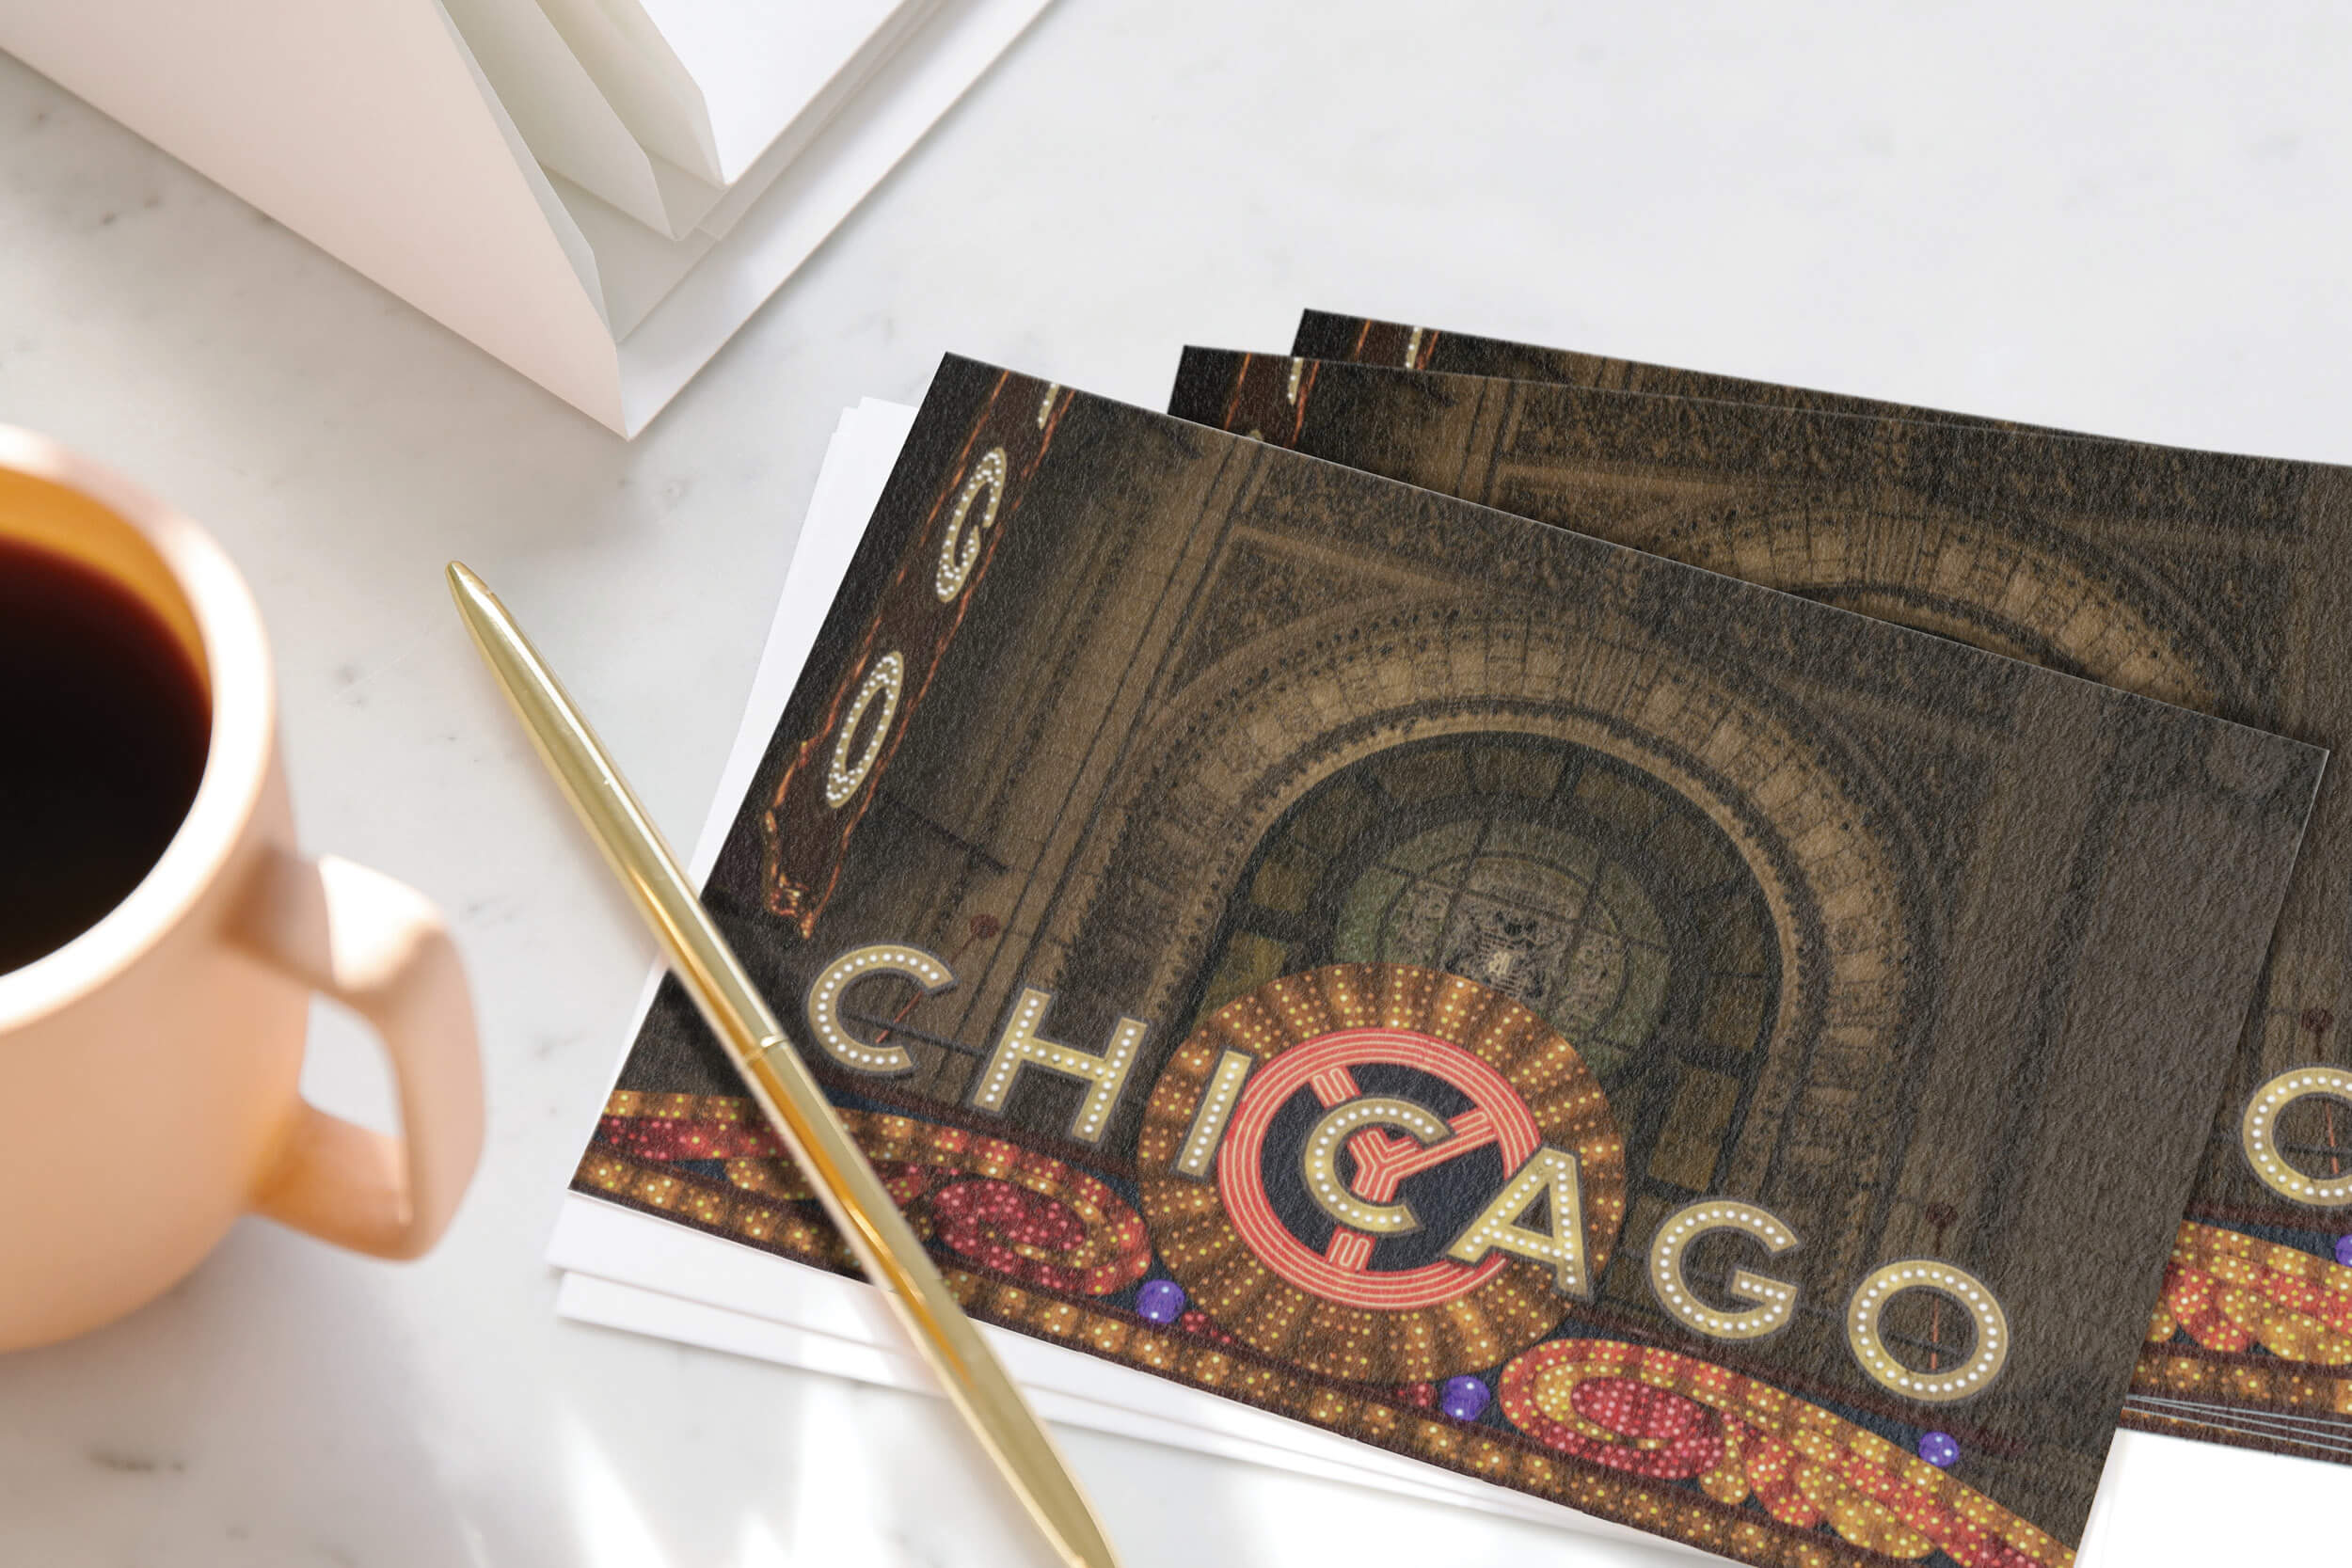 Pen resting on stack of Chicago postcards